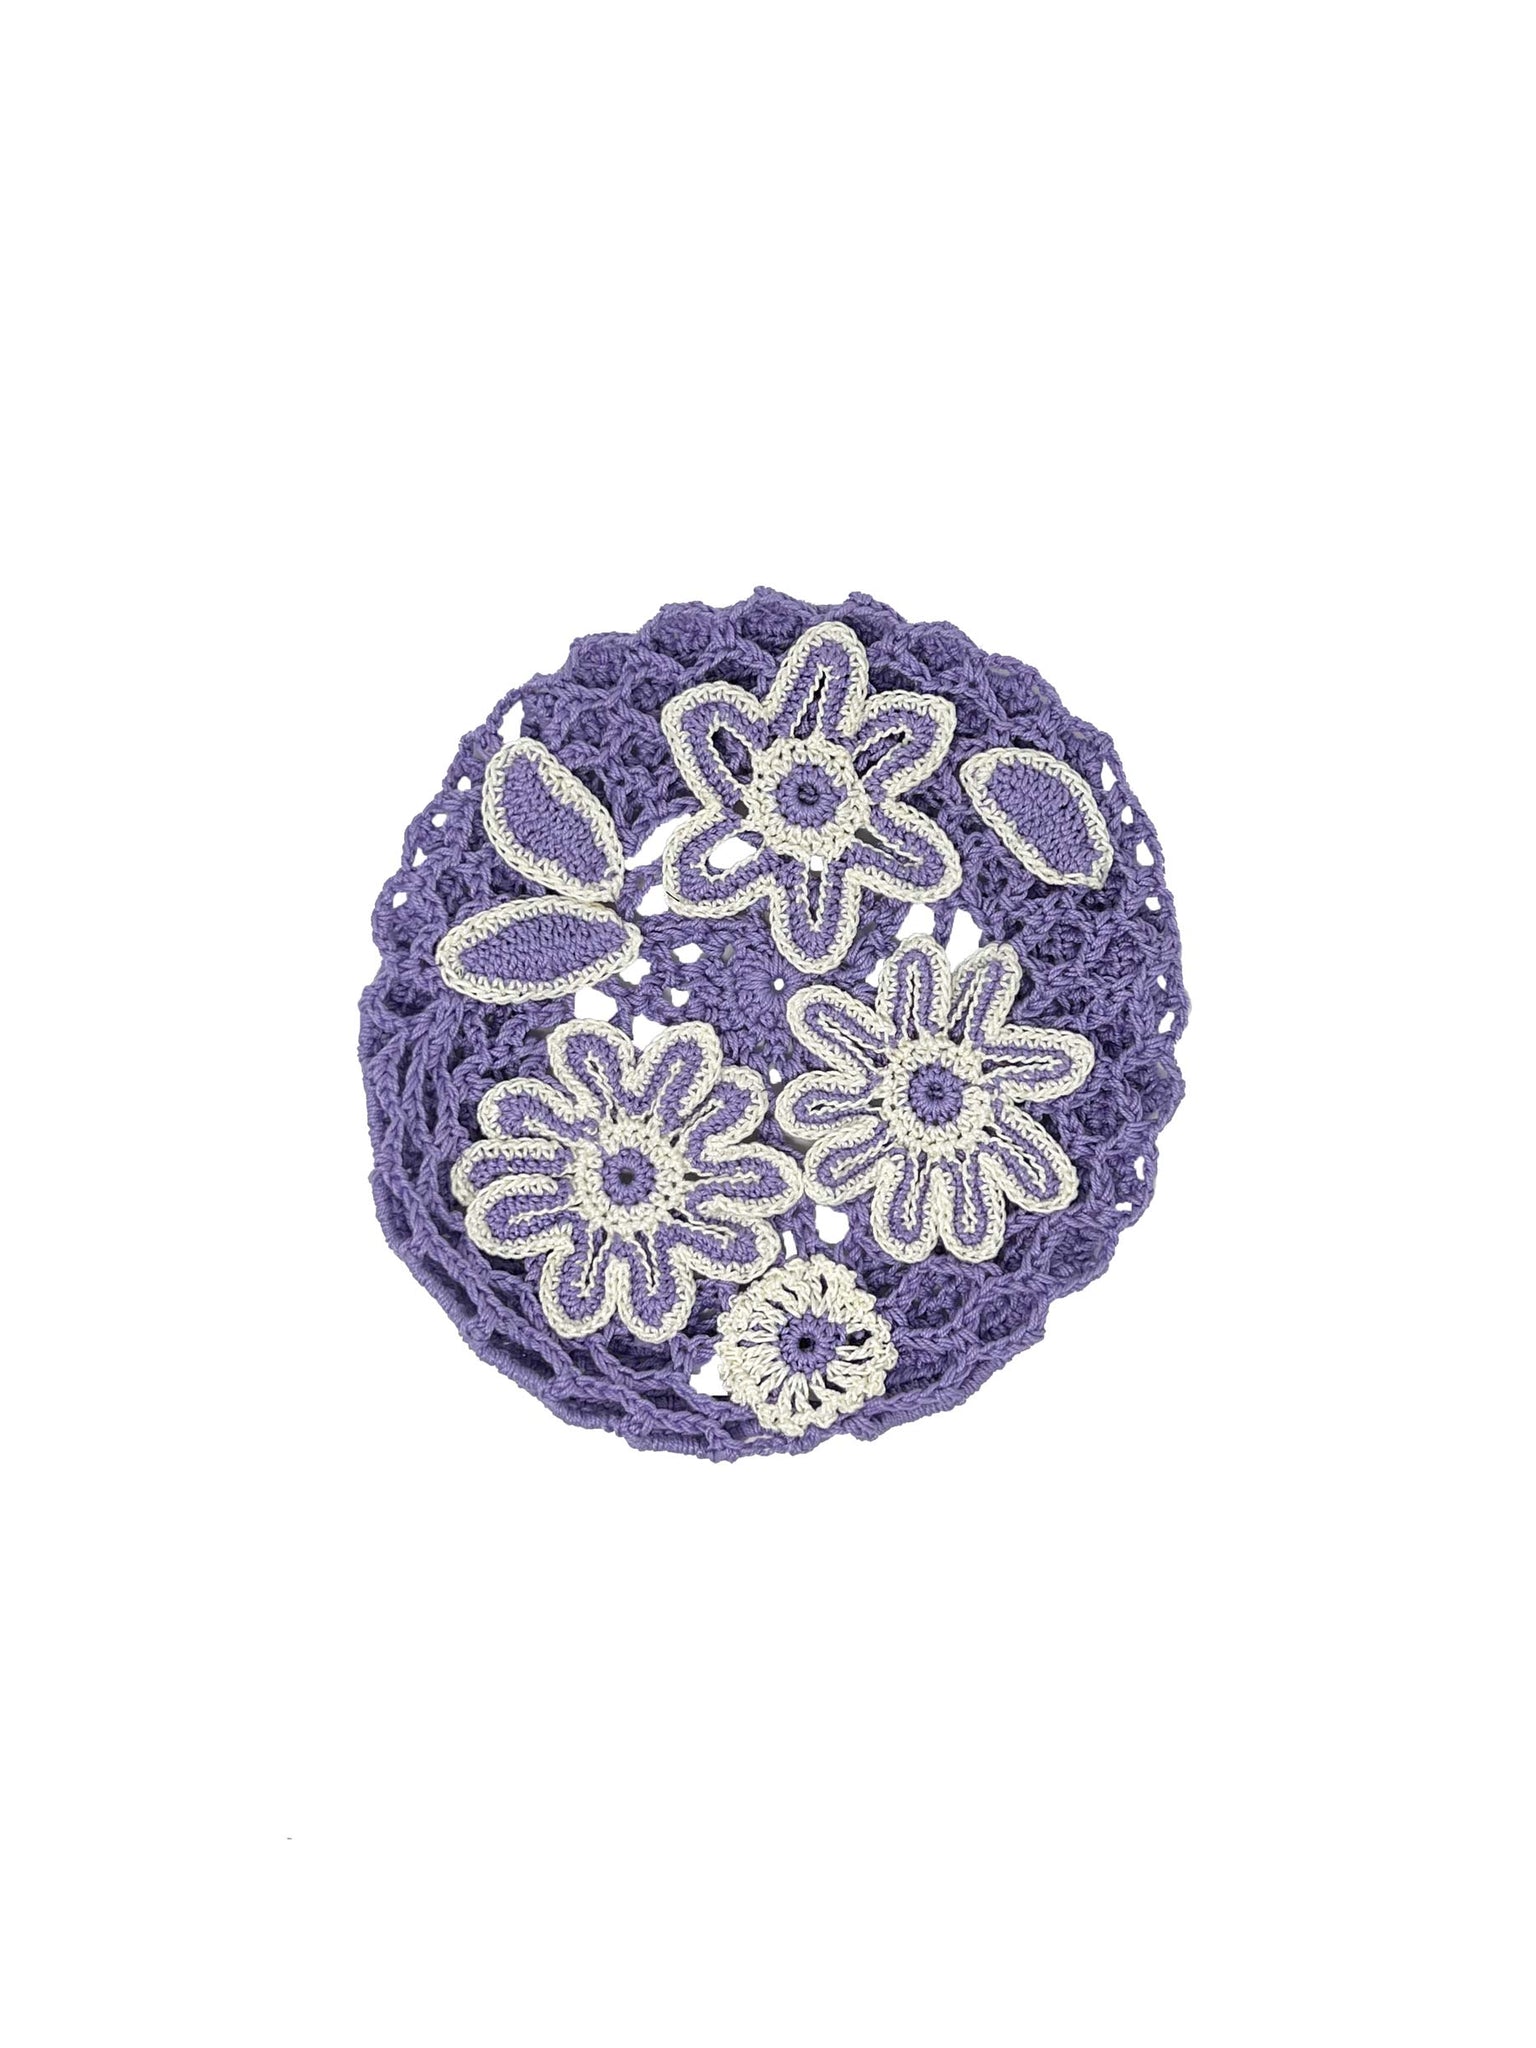 Lilac crocheted beret with crocheted flowers